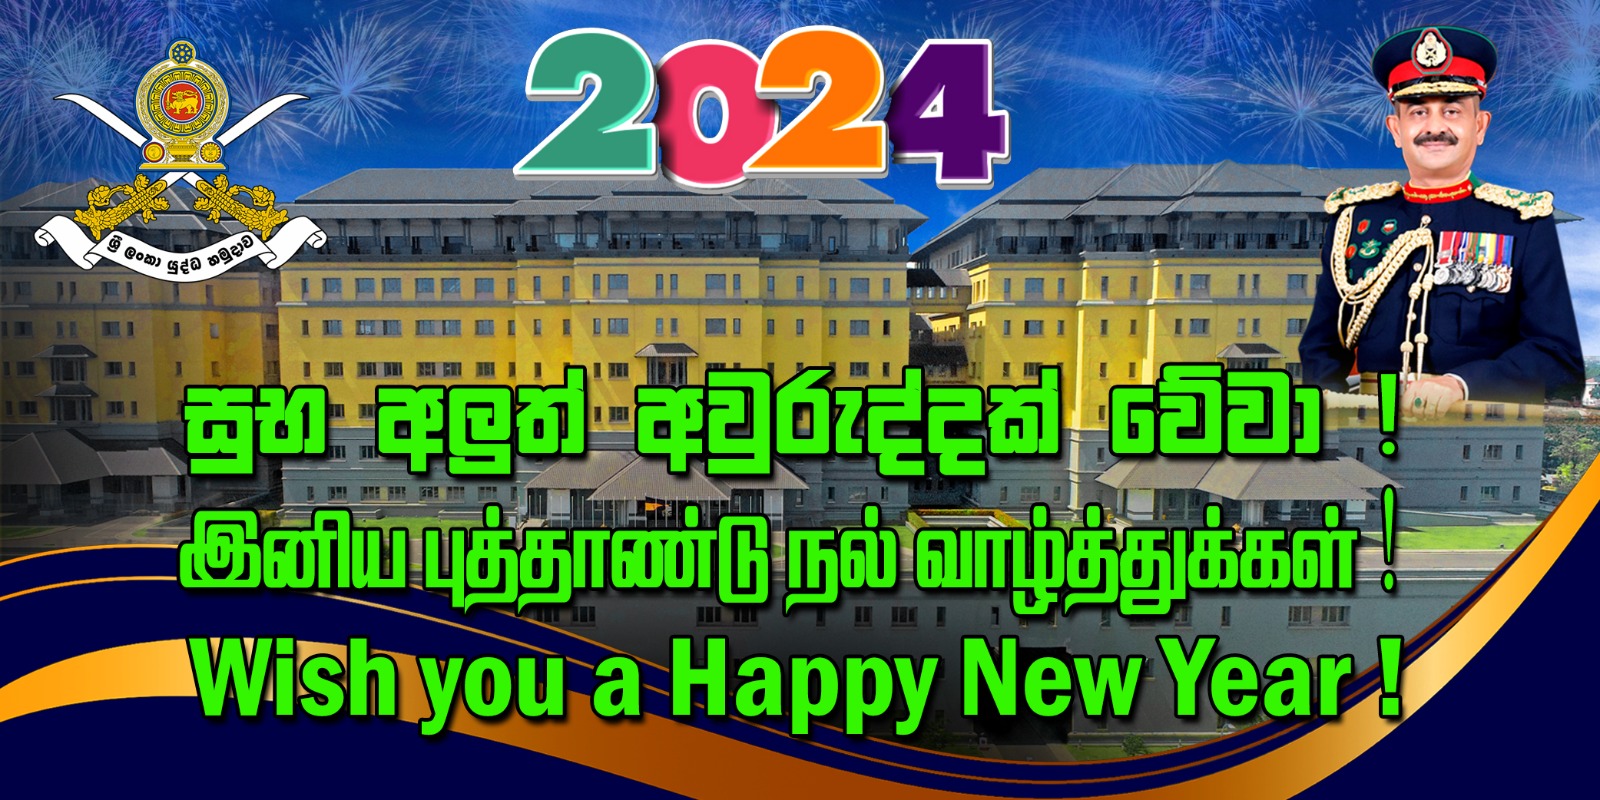 Commander Wishes Best of Luck and Prosperity to All in The New Year - 2024  